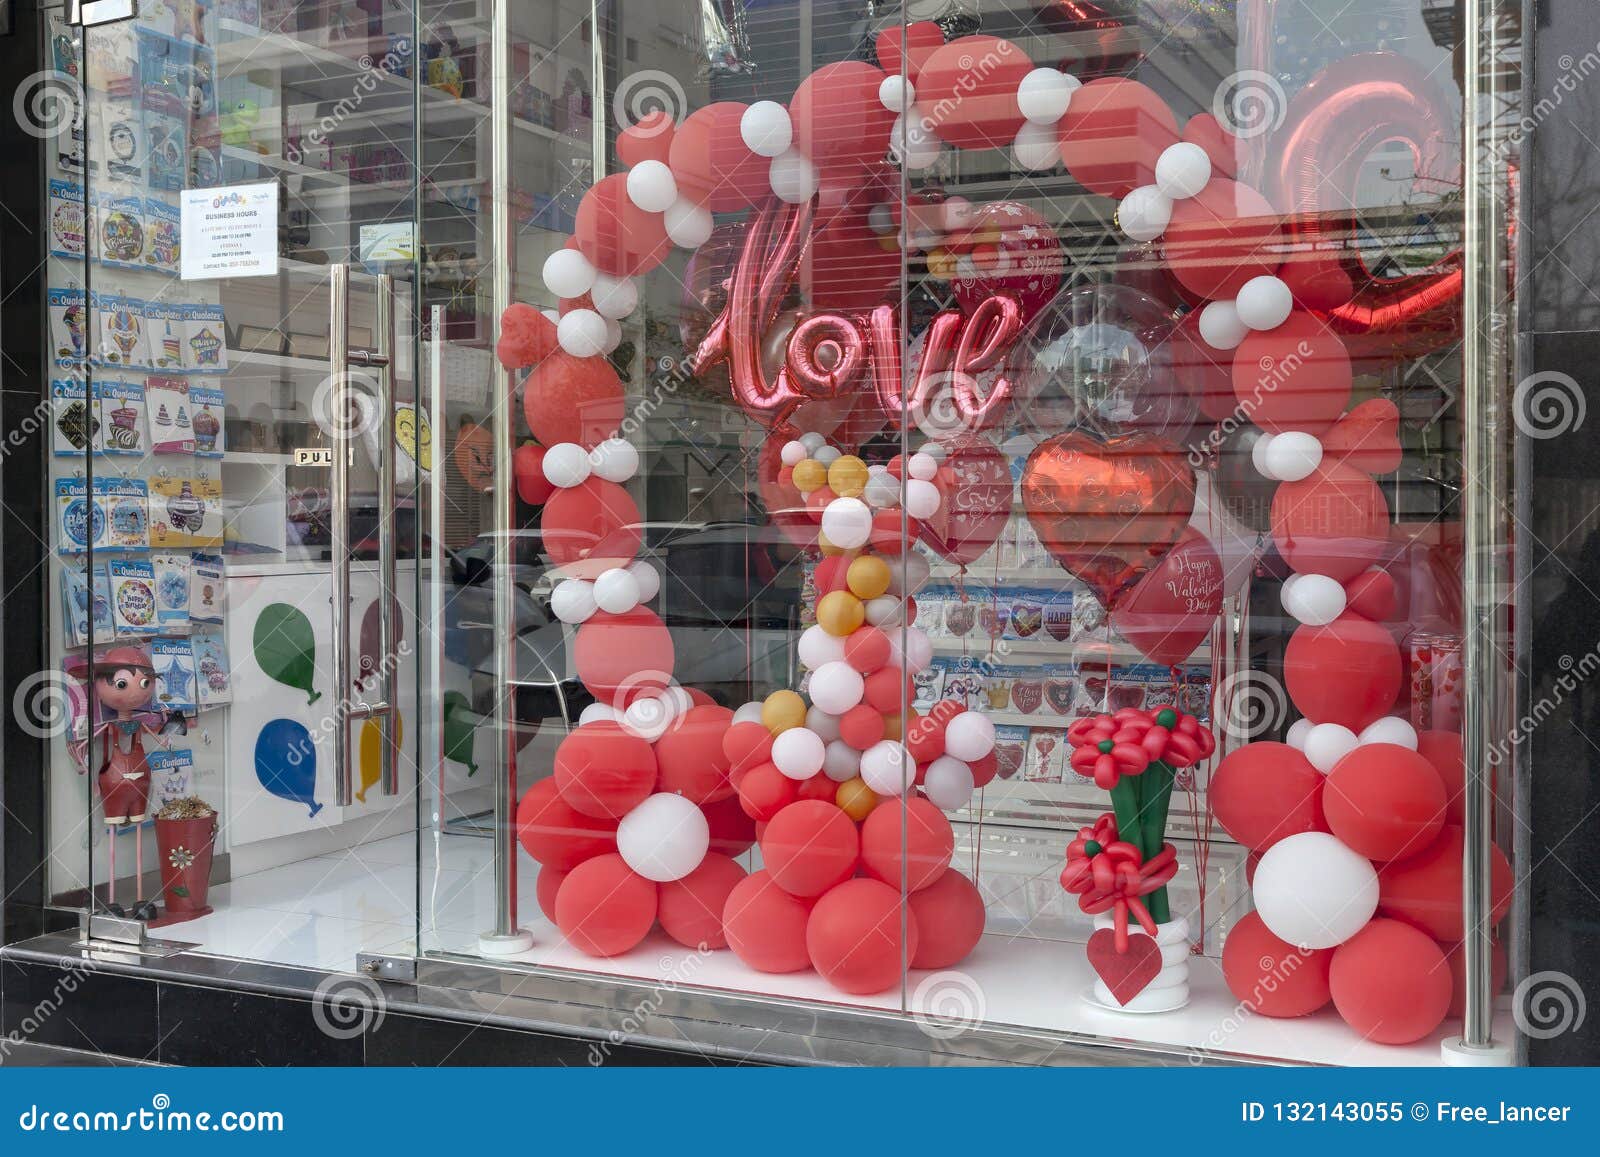 Happy Valentine’s Day Hearts Retail Shop Window Display Wall Stickers Decal A324 